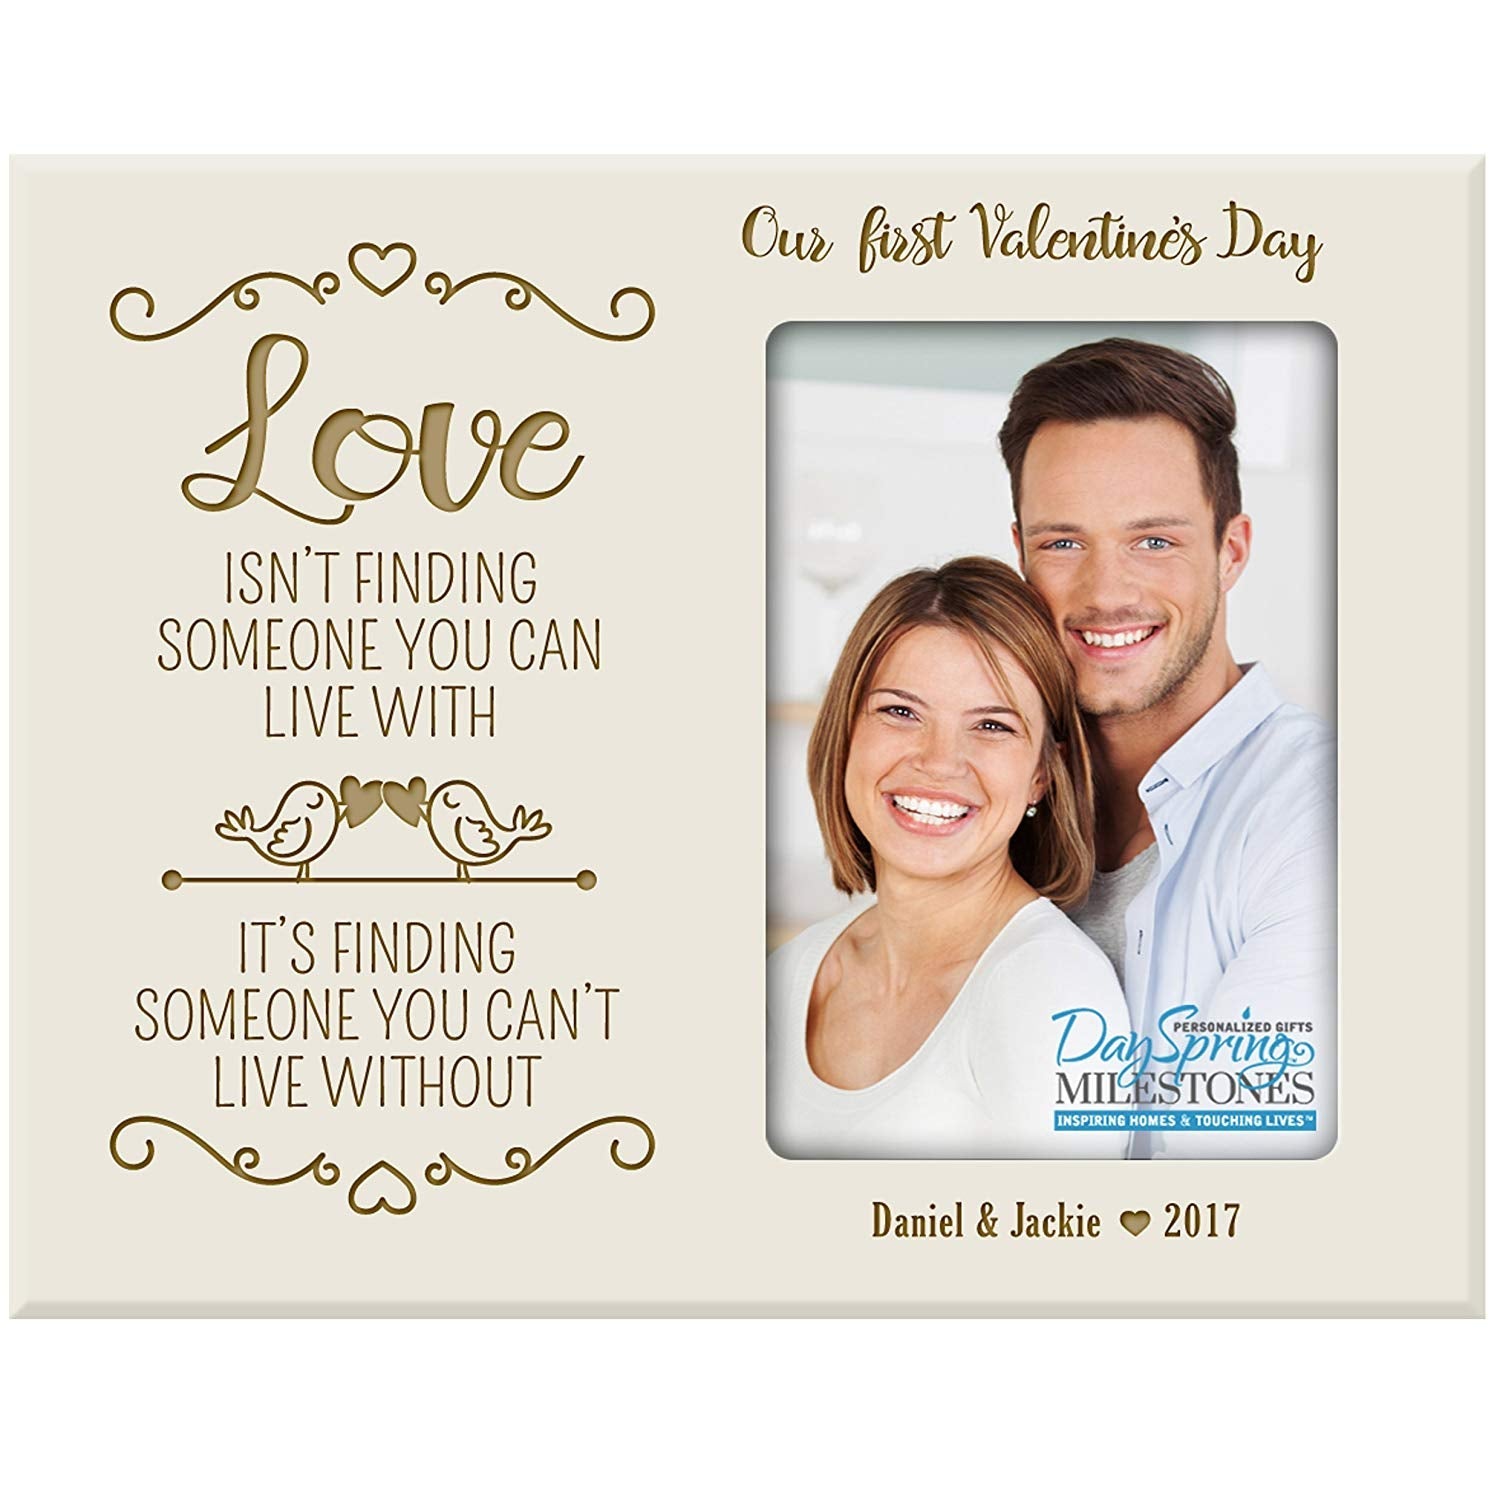 Personalized Valentine's Day Frames - Our First Valentine's Day - LifeSong Milestones